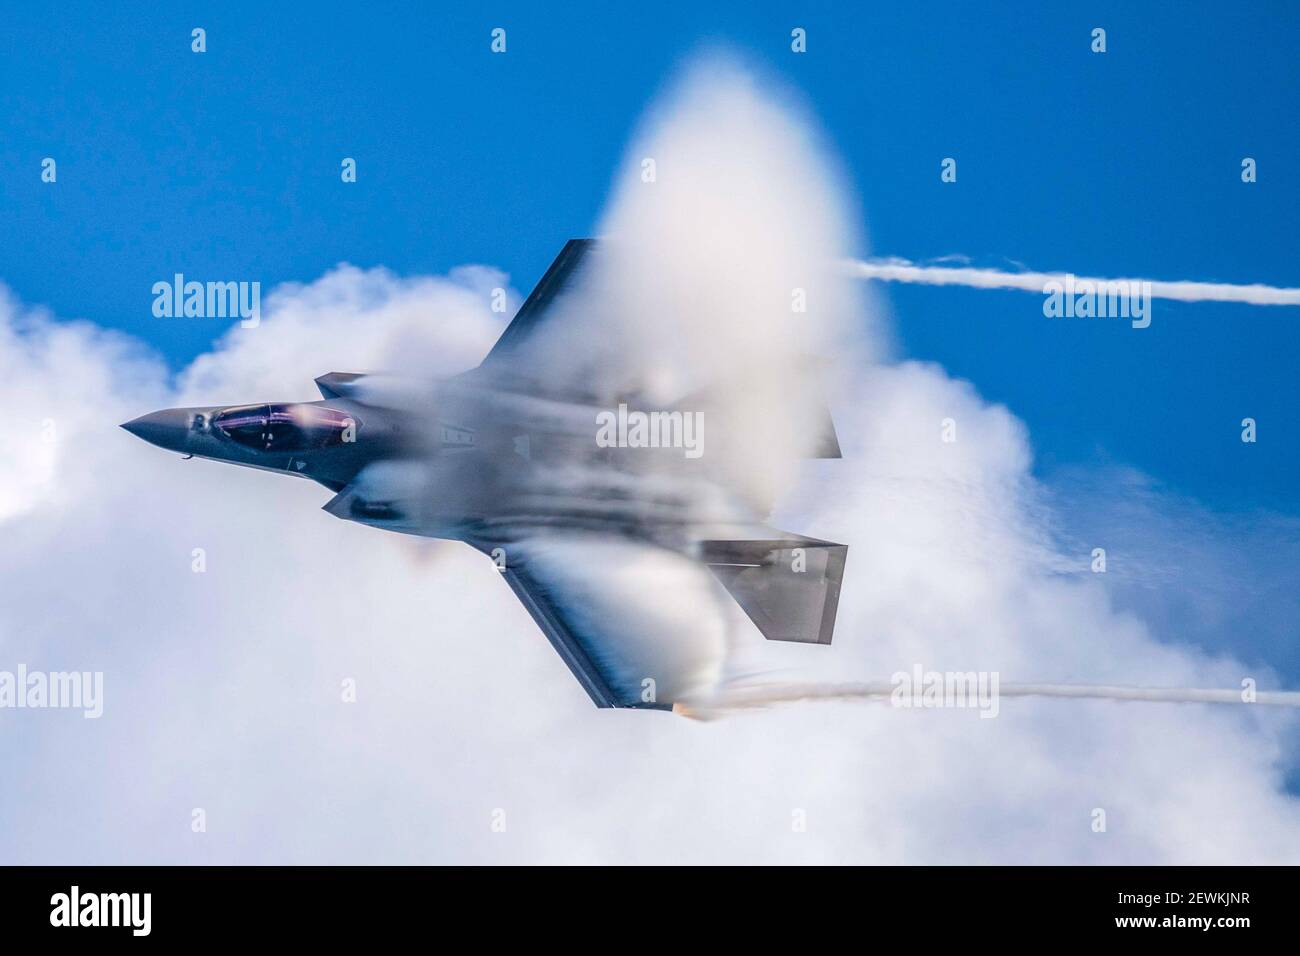 Capt. Kristin Wolfe, F-35 Lightning II Demonstration Team commander and pilot, performs the ''dedication pass'' maneuver at the 2020 Fort Lauderdale Stock Photo